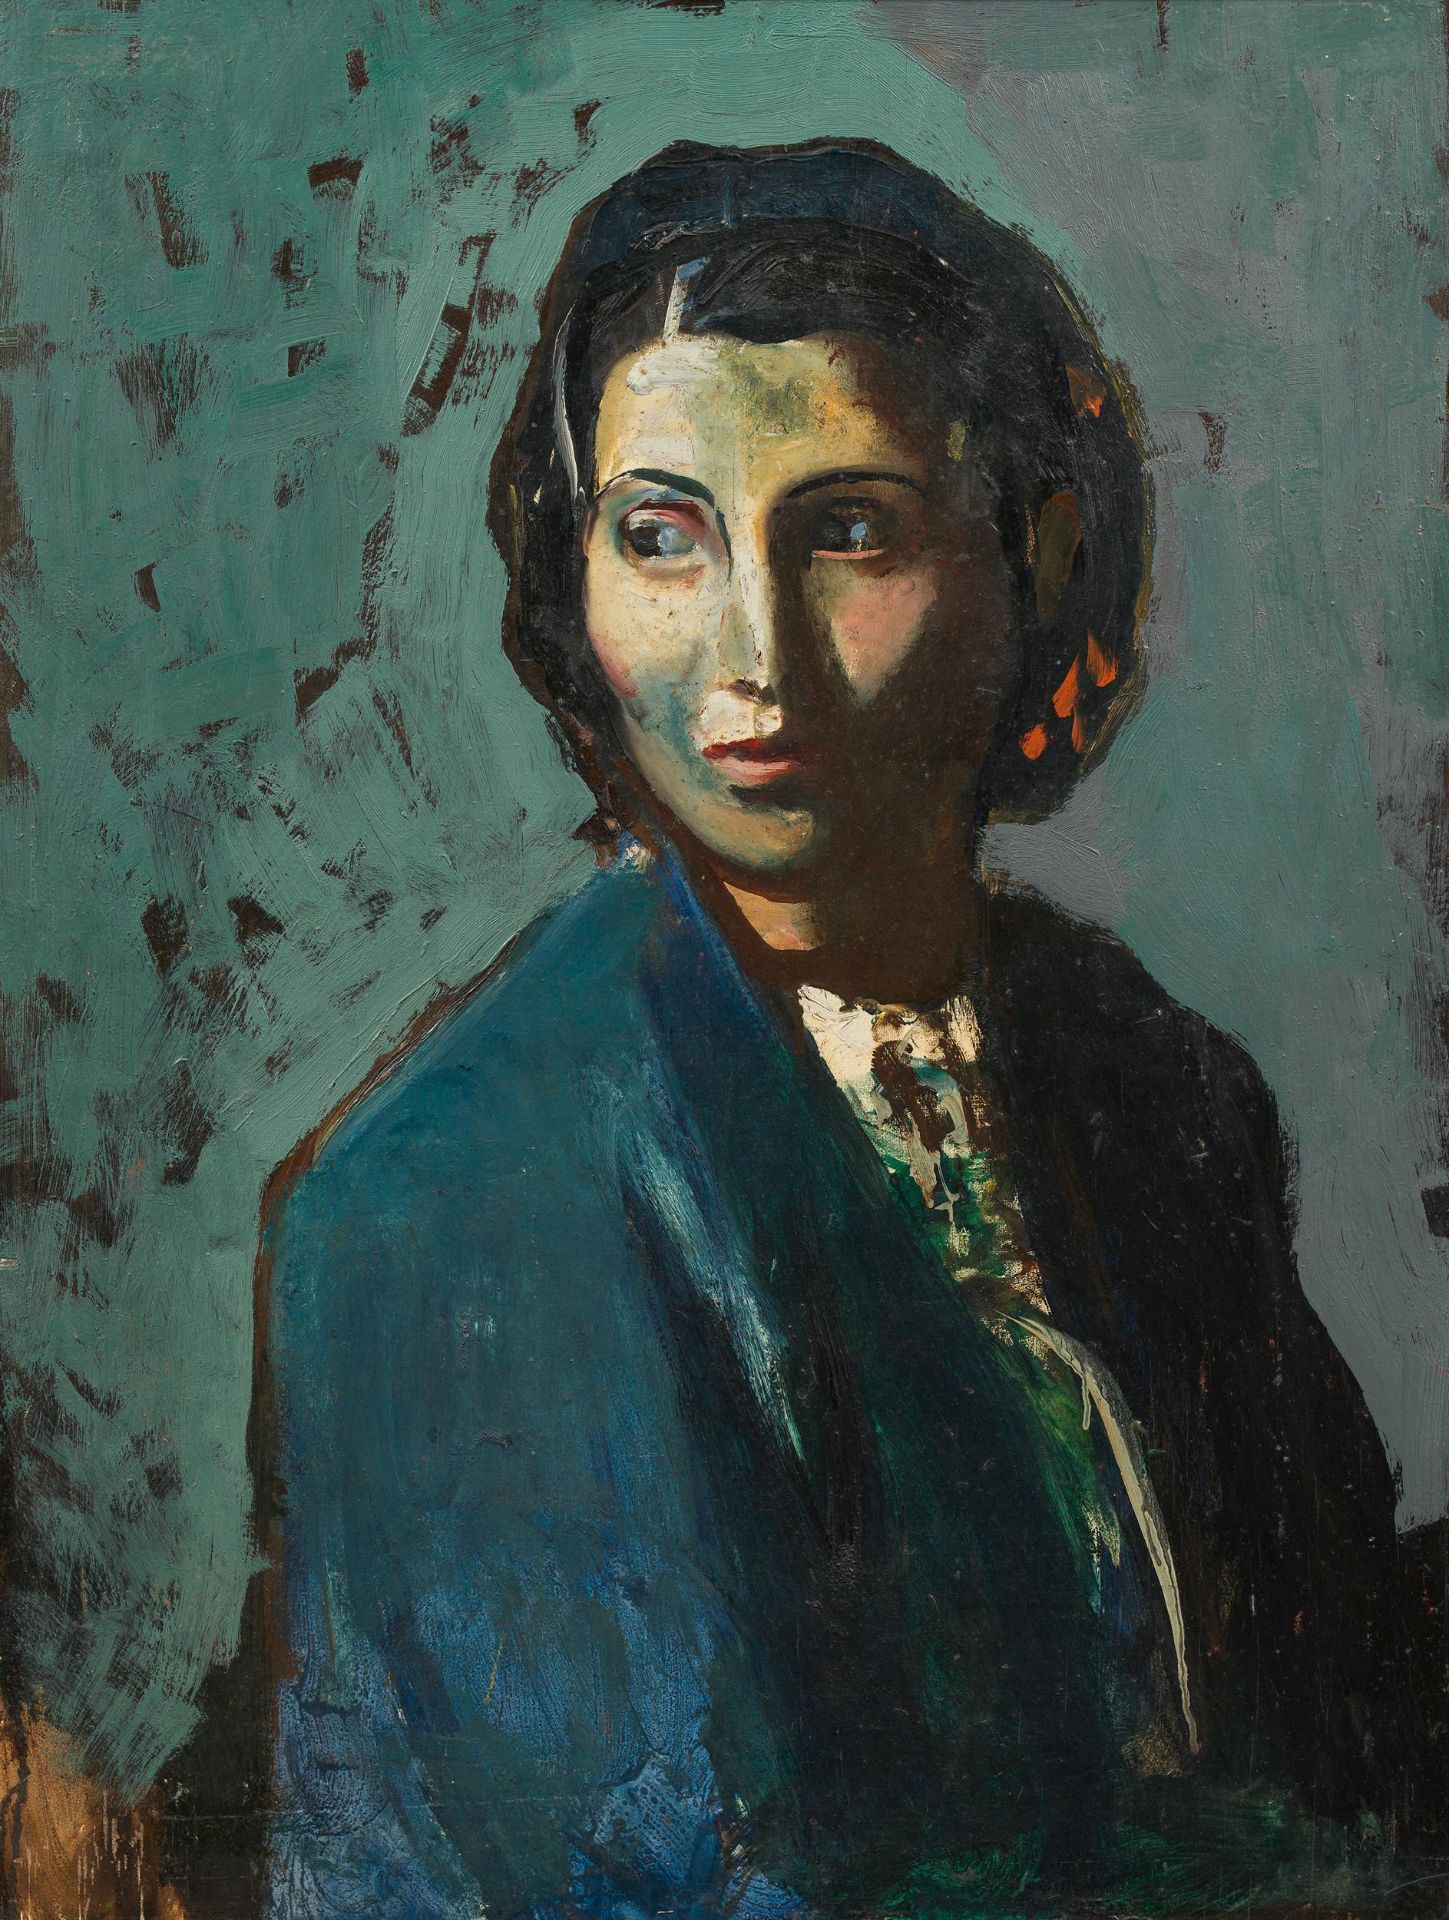 Josef Dobrowsky: Lady with blue coat